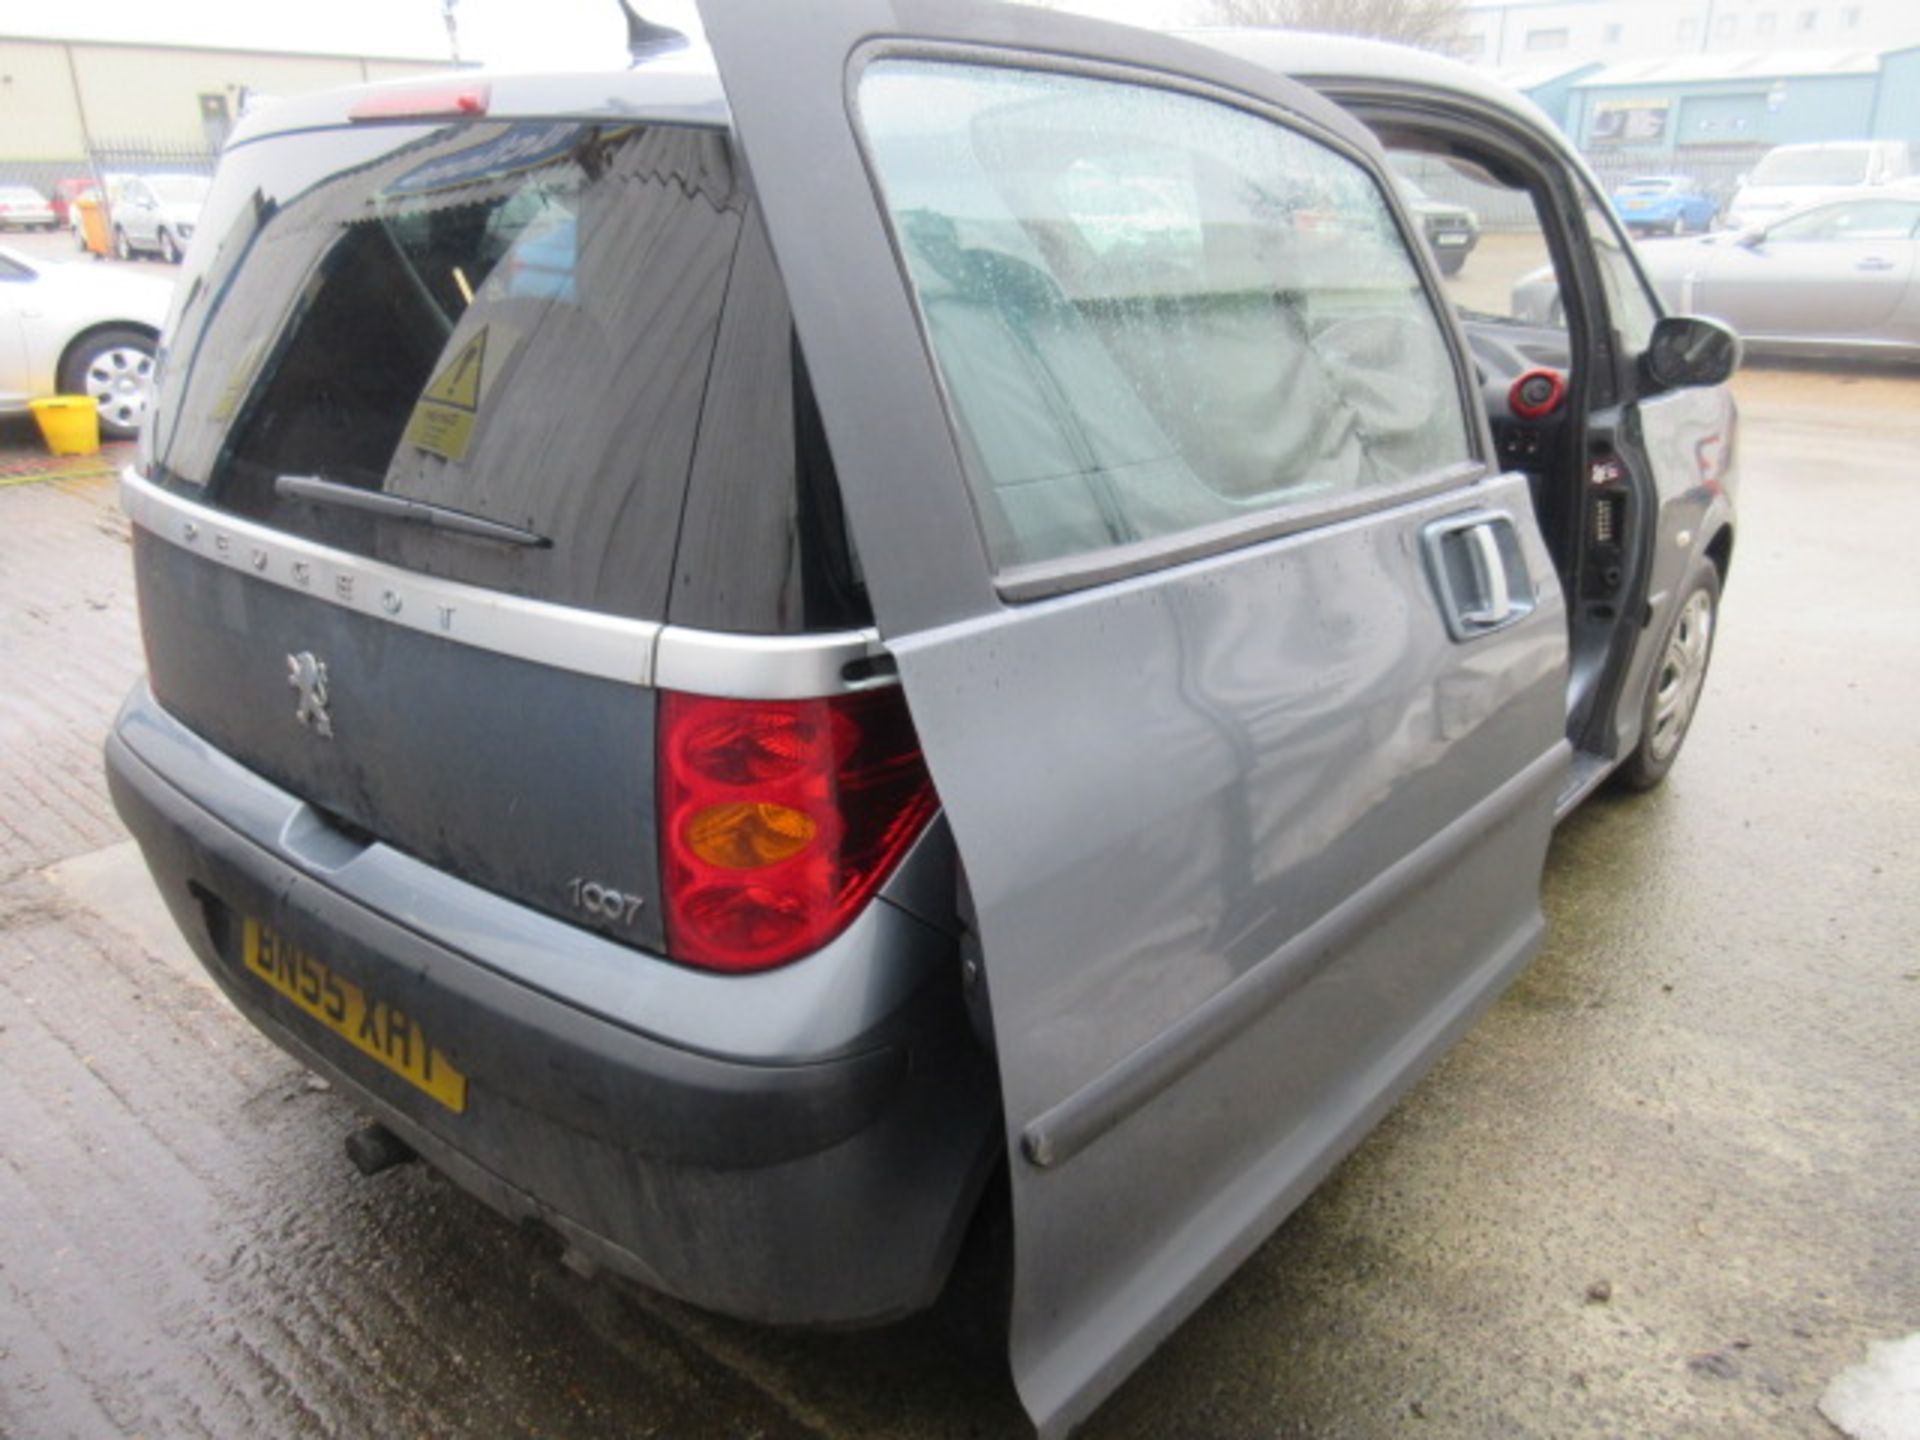 55 05 Peugeot 1007 Dolce - Image 9 of 22